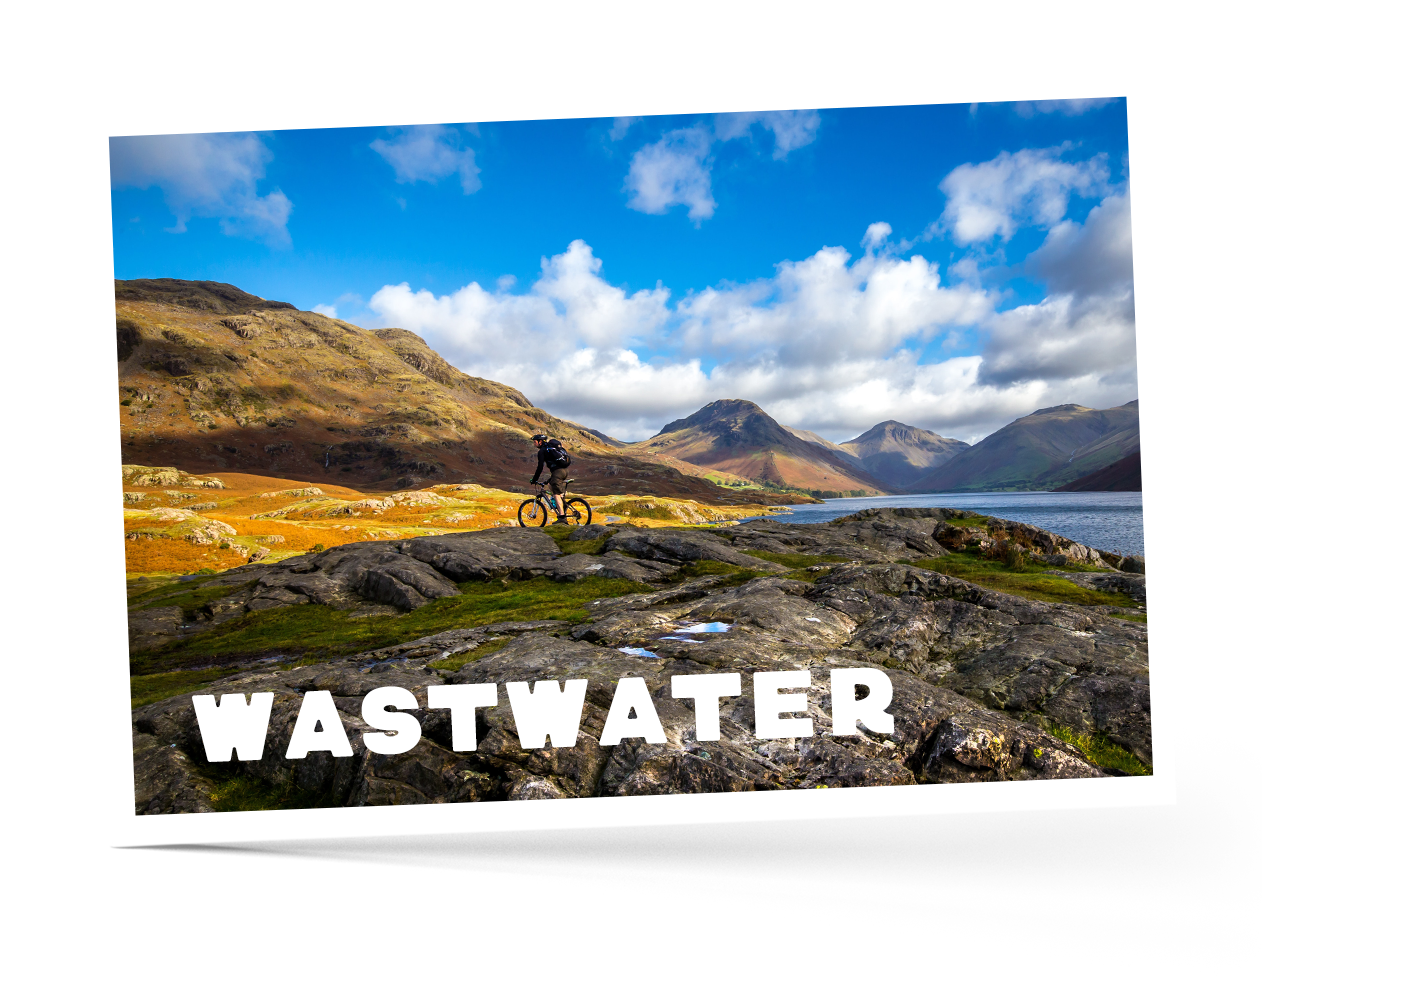 Man Riding a Mountain Bike over Rocky Terrain in Wastwater, Lake District